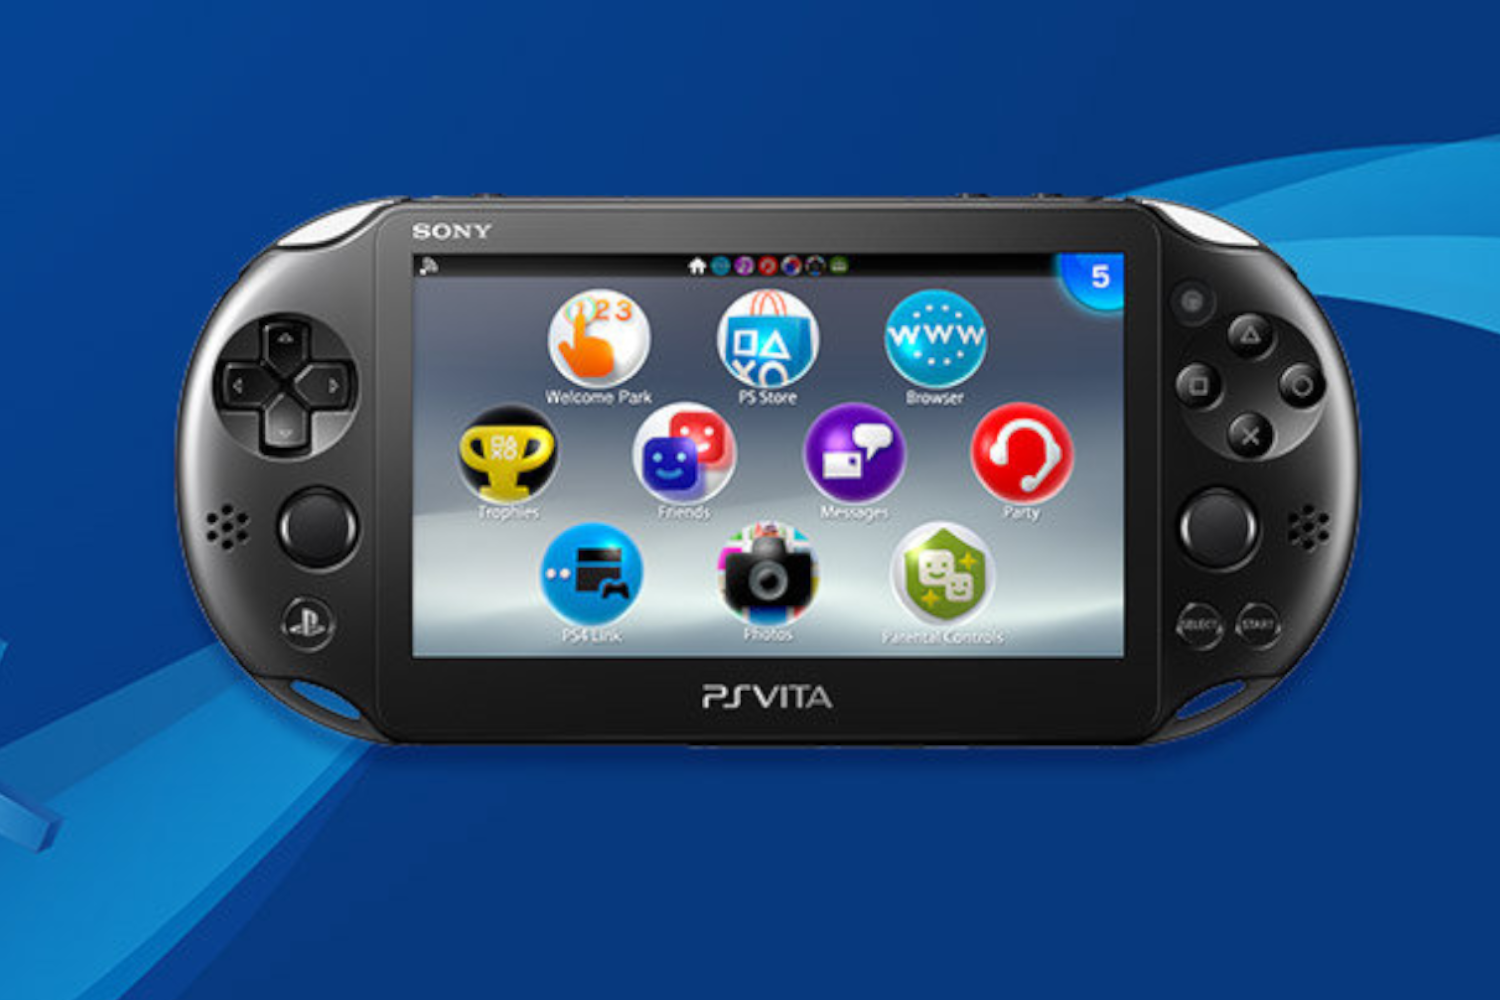 Ps Vita 2 Release Date Online Discount Shop For Electronics Apparel Toys Books Games Computers Shoes Jewelry Watches Baby Products Sports Outdoors Office Products Bed Bath Furniture Tools Hardware